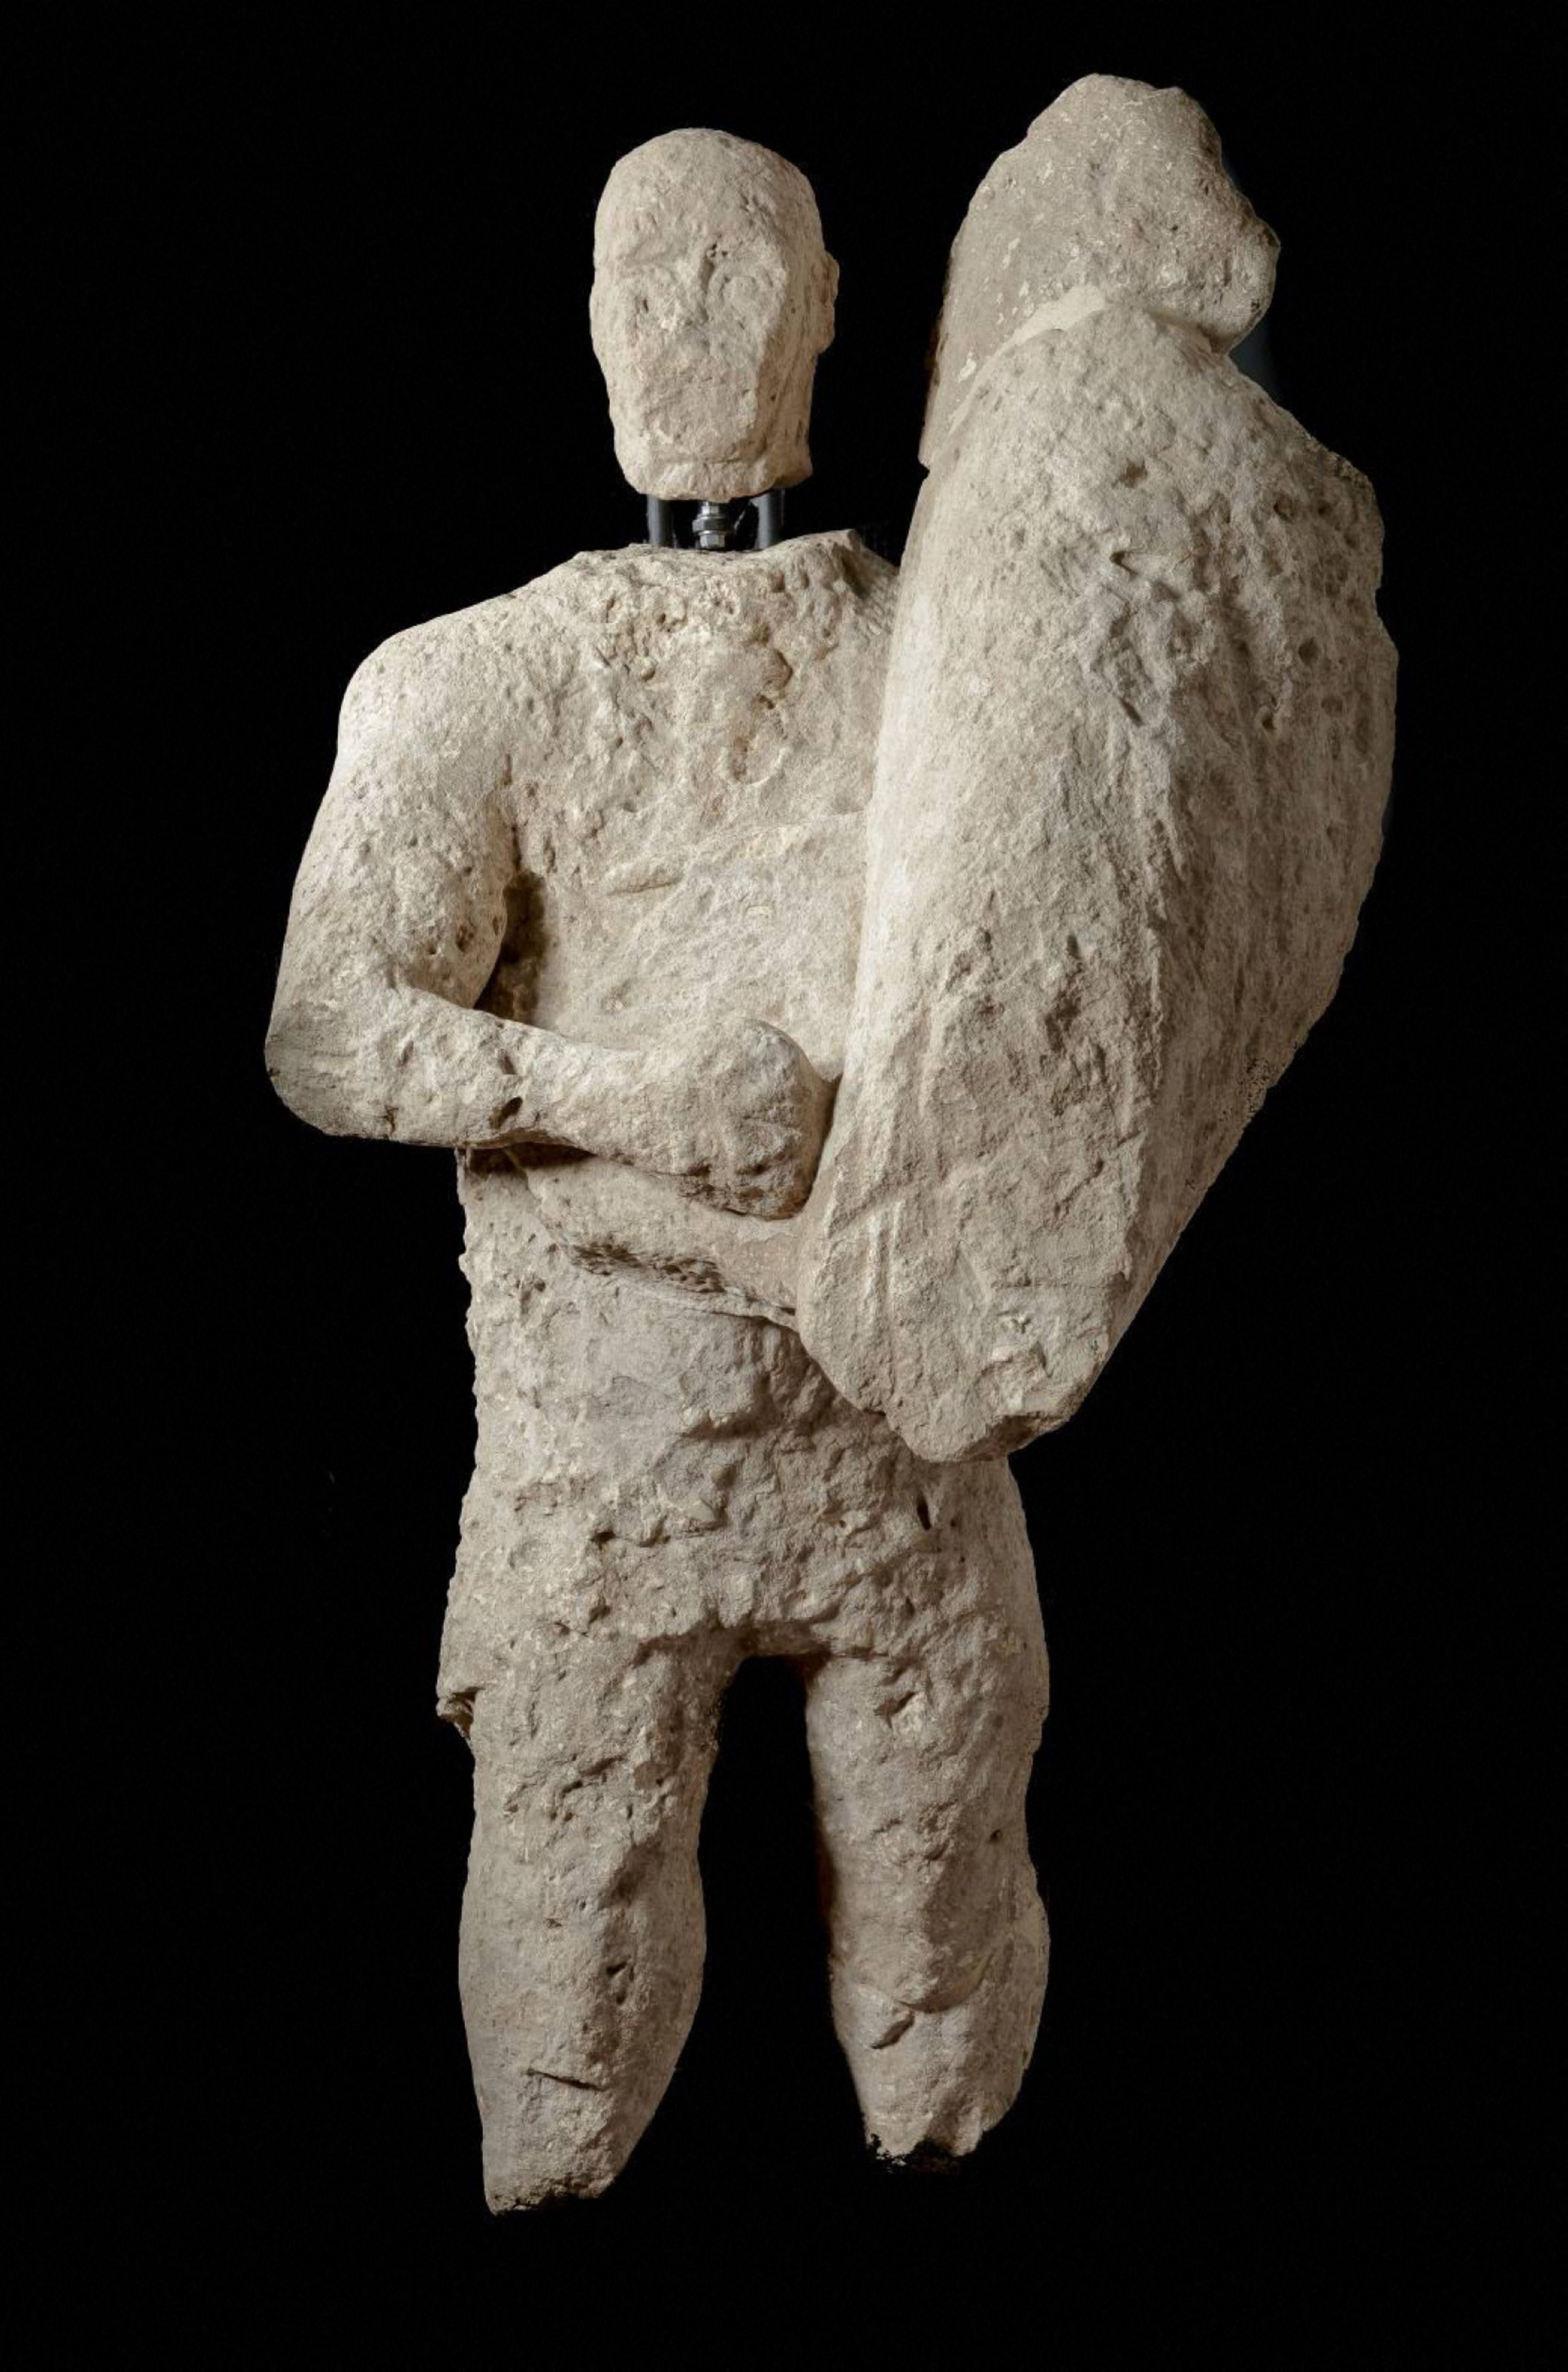 The Italian Ministry of Culture shows one of the two statues of boxers found during the 2014 excavation campaign, exhibited at the Giovanni Marongiu civic museum in Cabras, central-western Sardinia, Italy, May 7, 2022 (Photo by AFP)